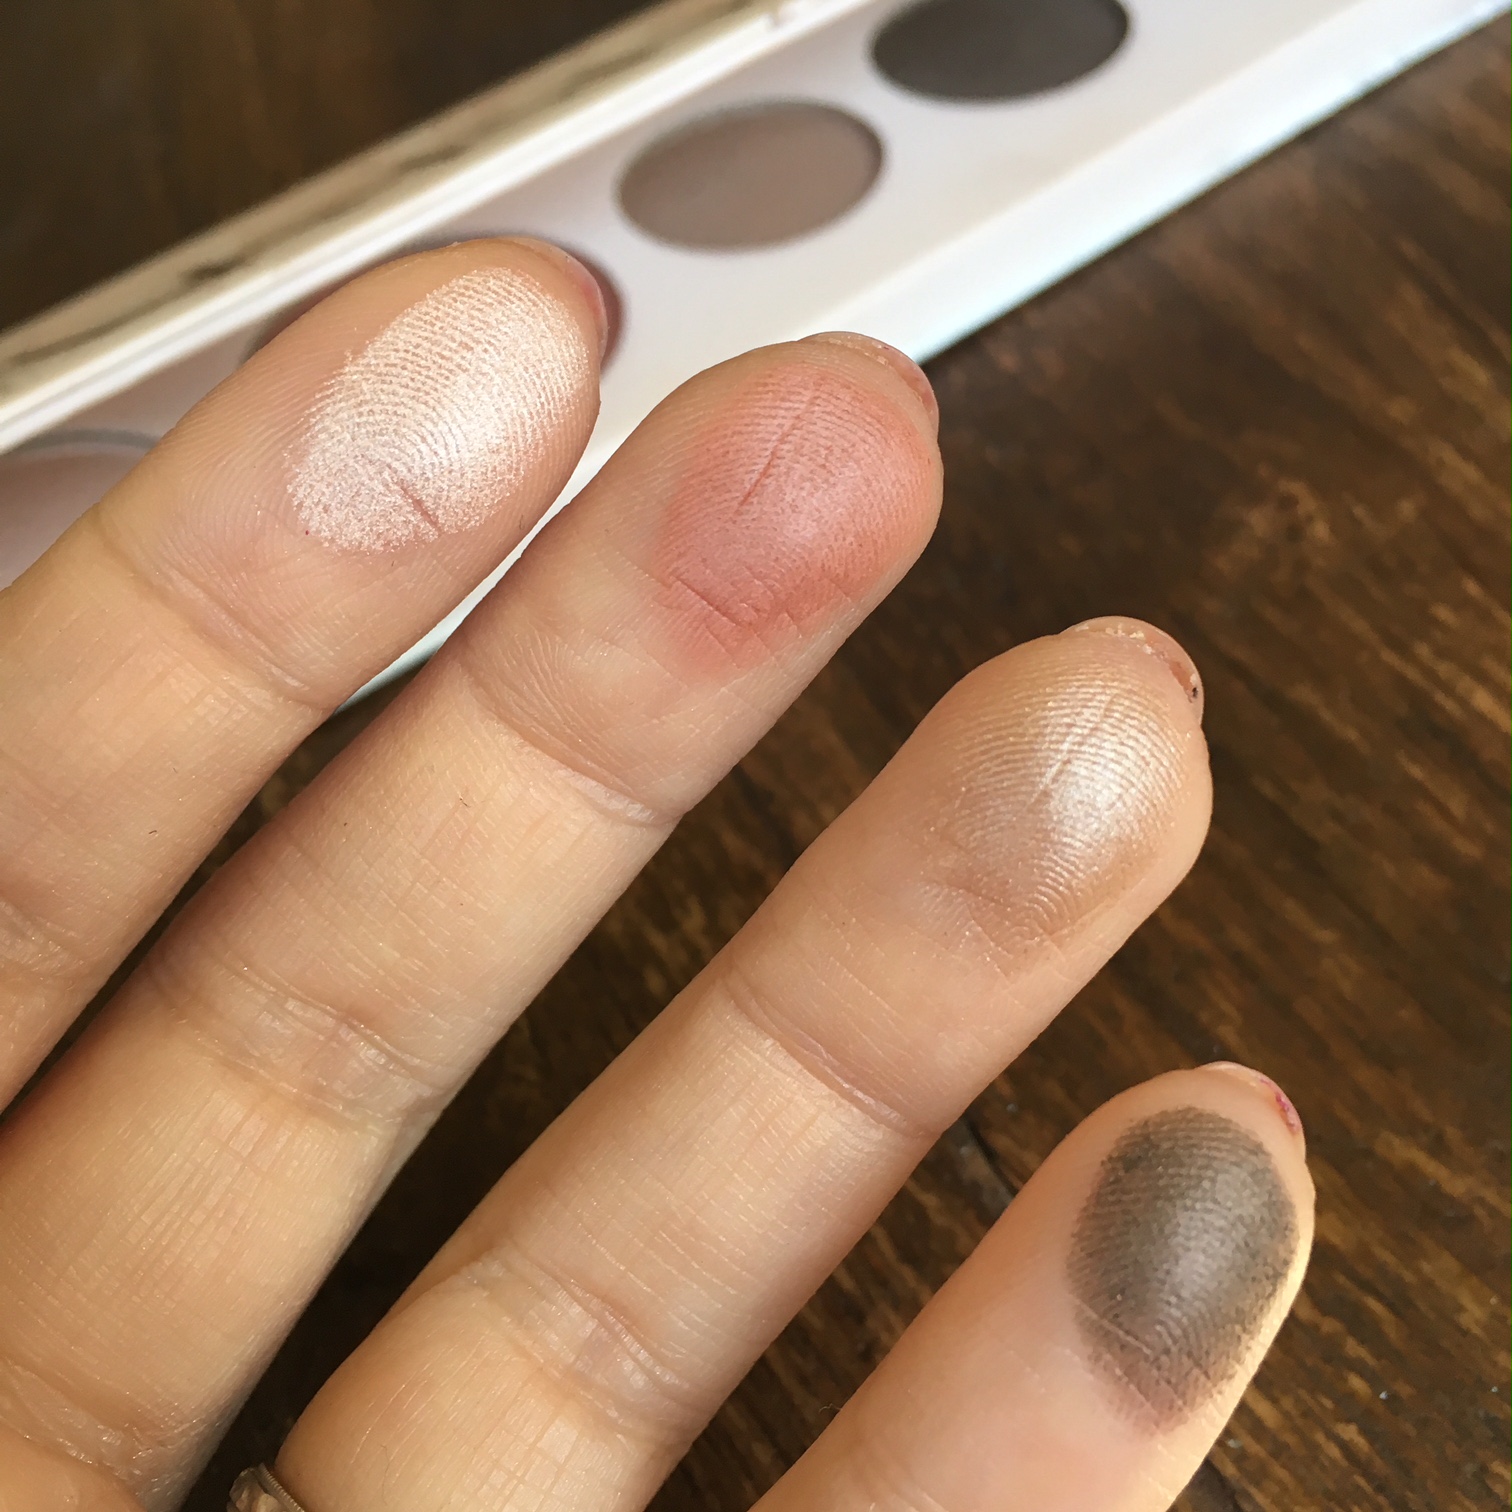 Naked II swatches